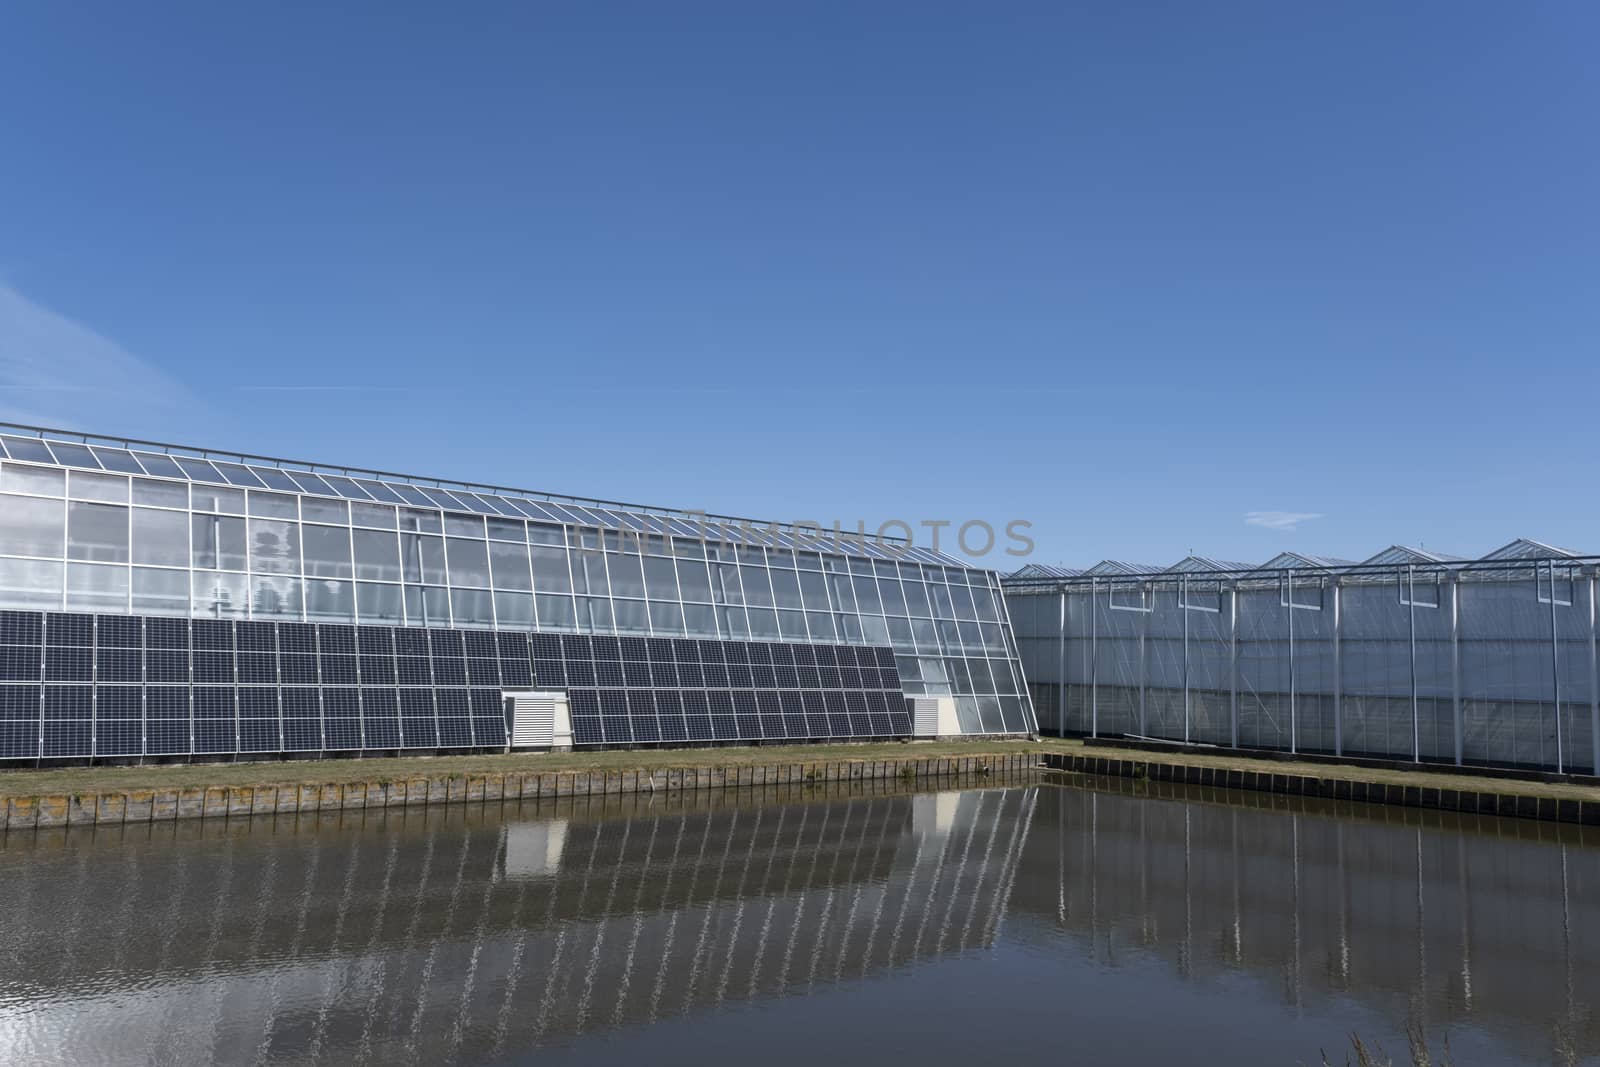 Great tomato nursery and greenhouse with summer sky in the Nethrlands